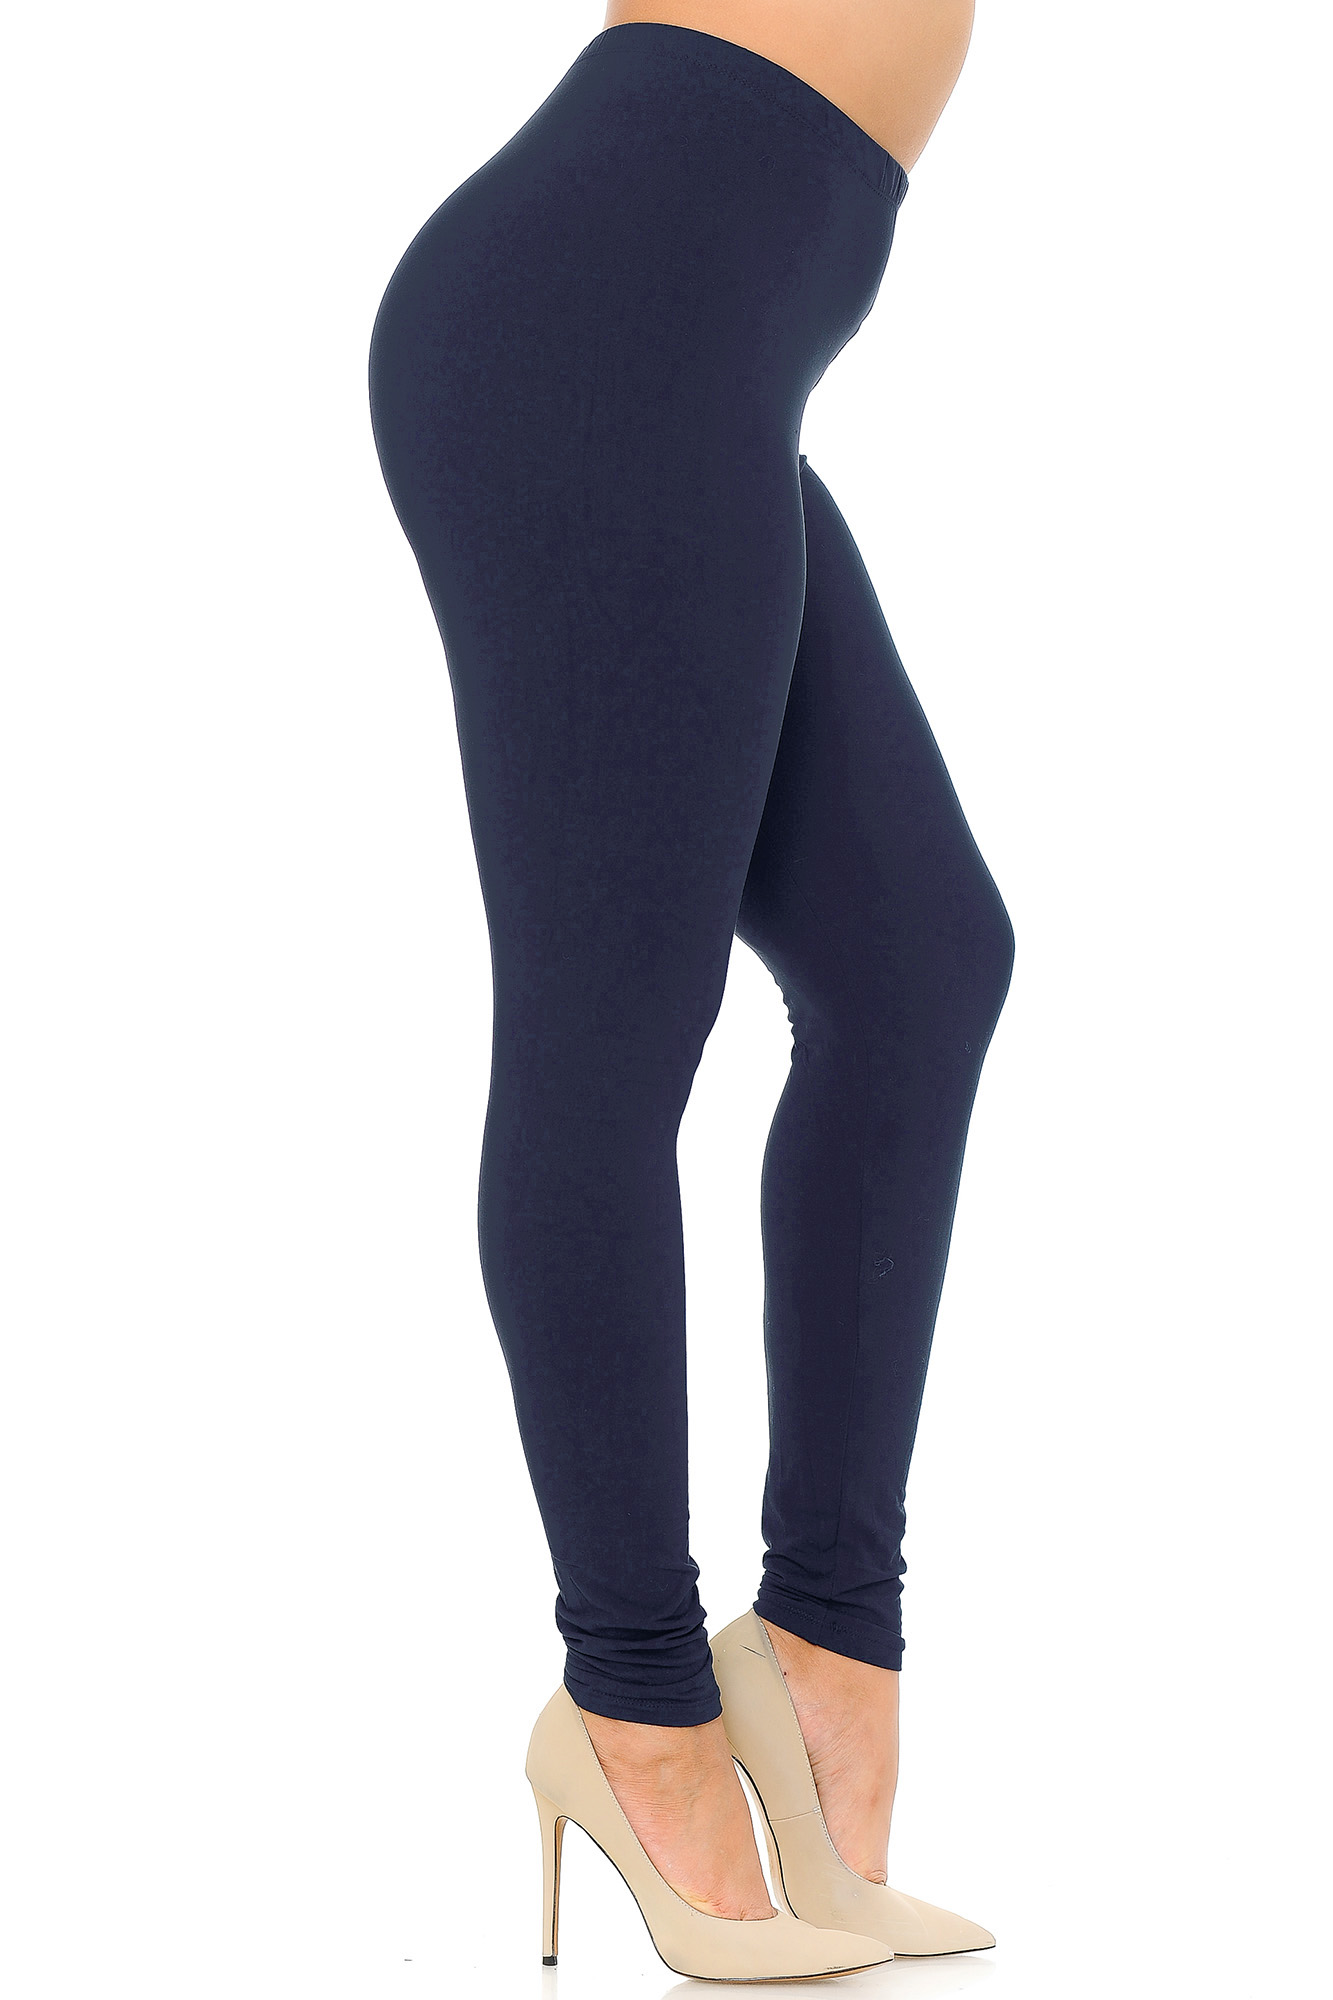 Buttery Smooth Magic Unicorns and Treats Extra Plus Size Leggings - 3X - 5X